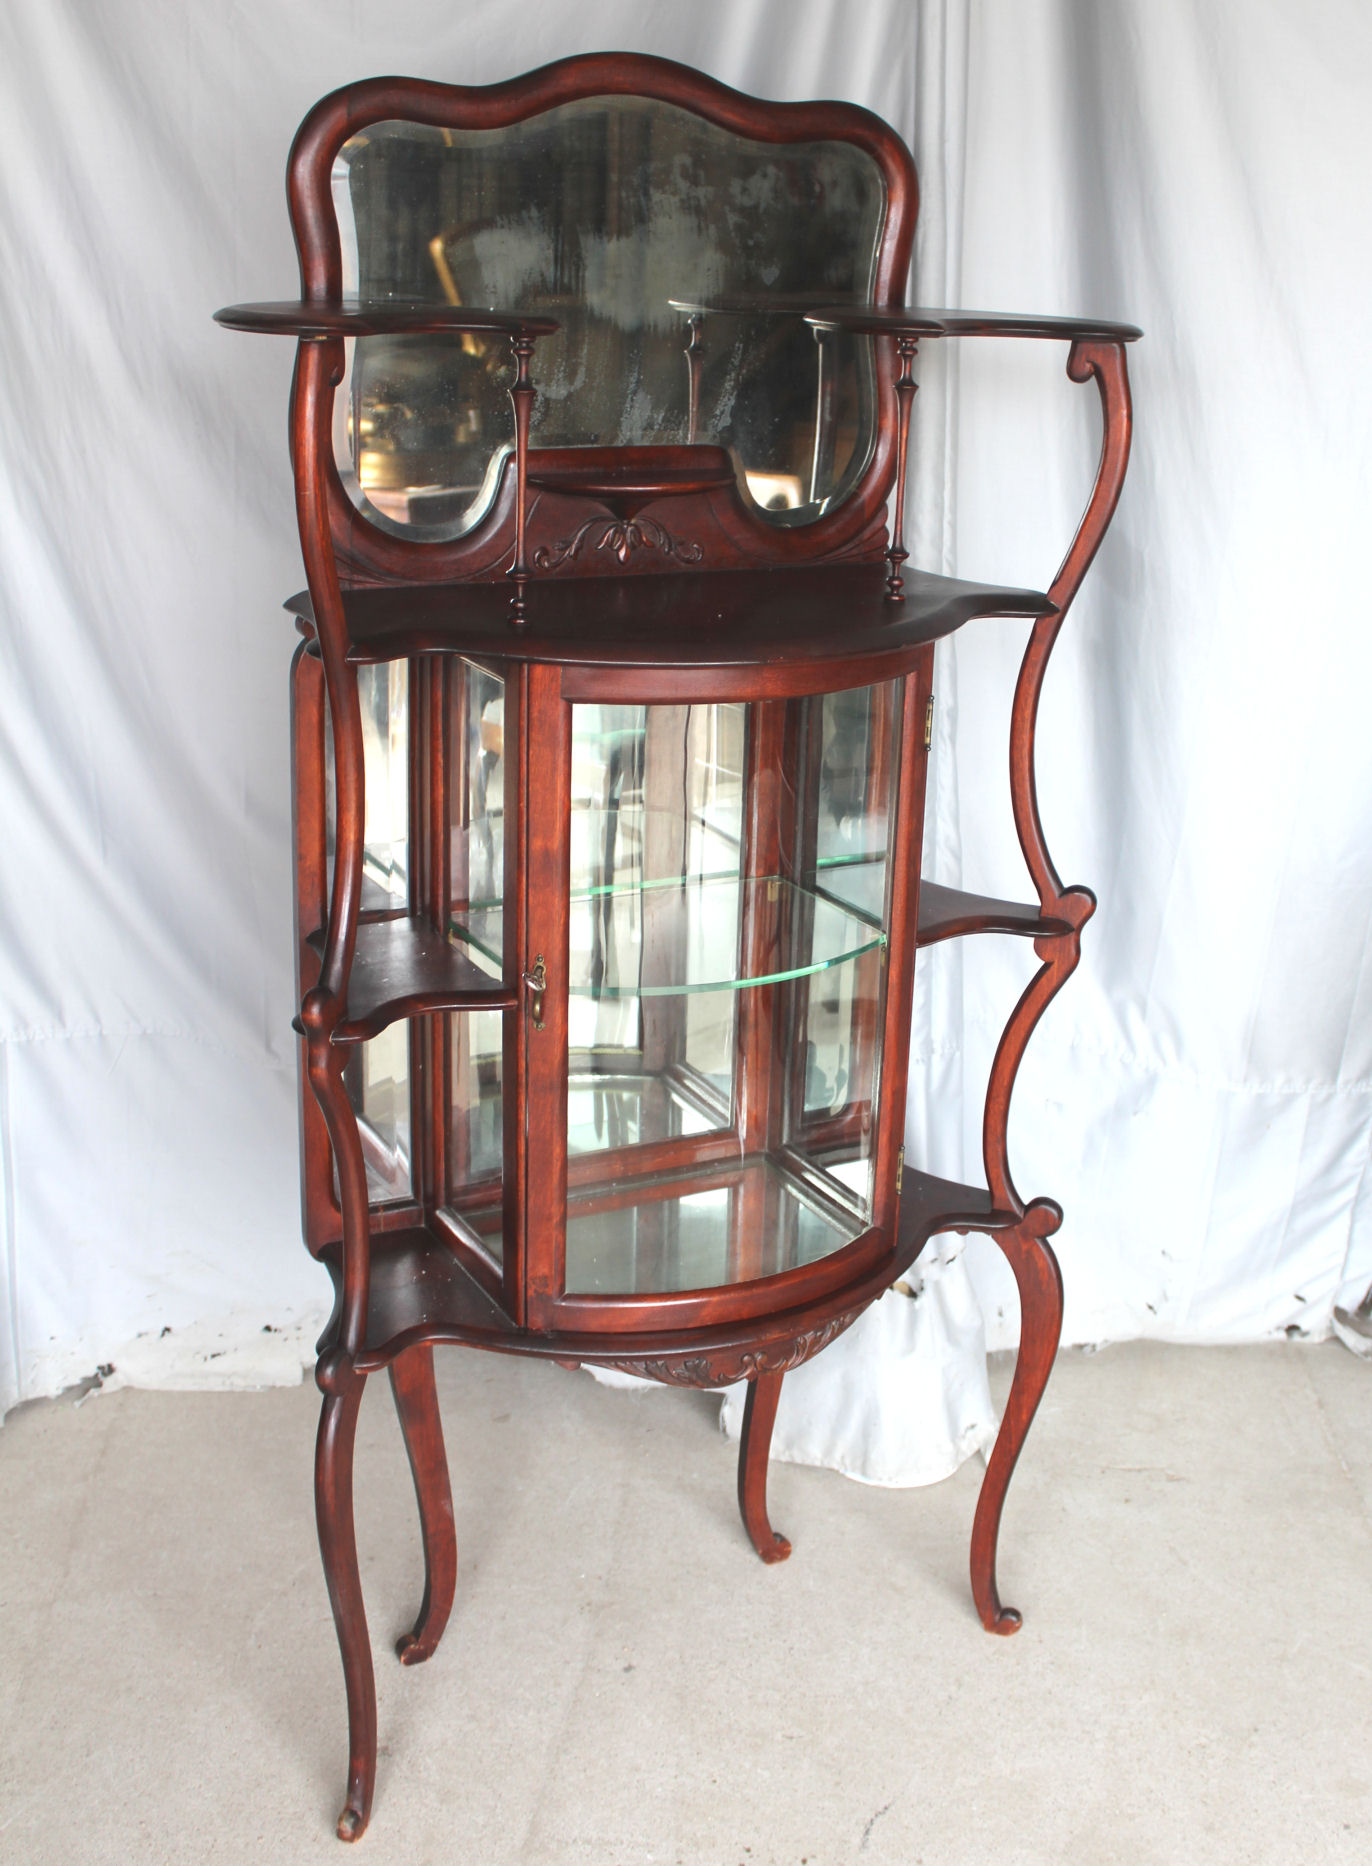 Bargain John S Antiques Antique Mahogany Etagere With Curved